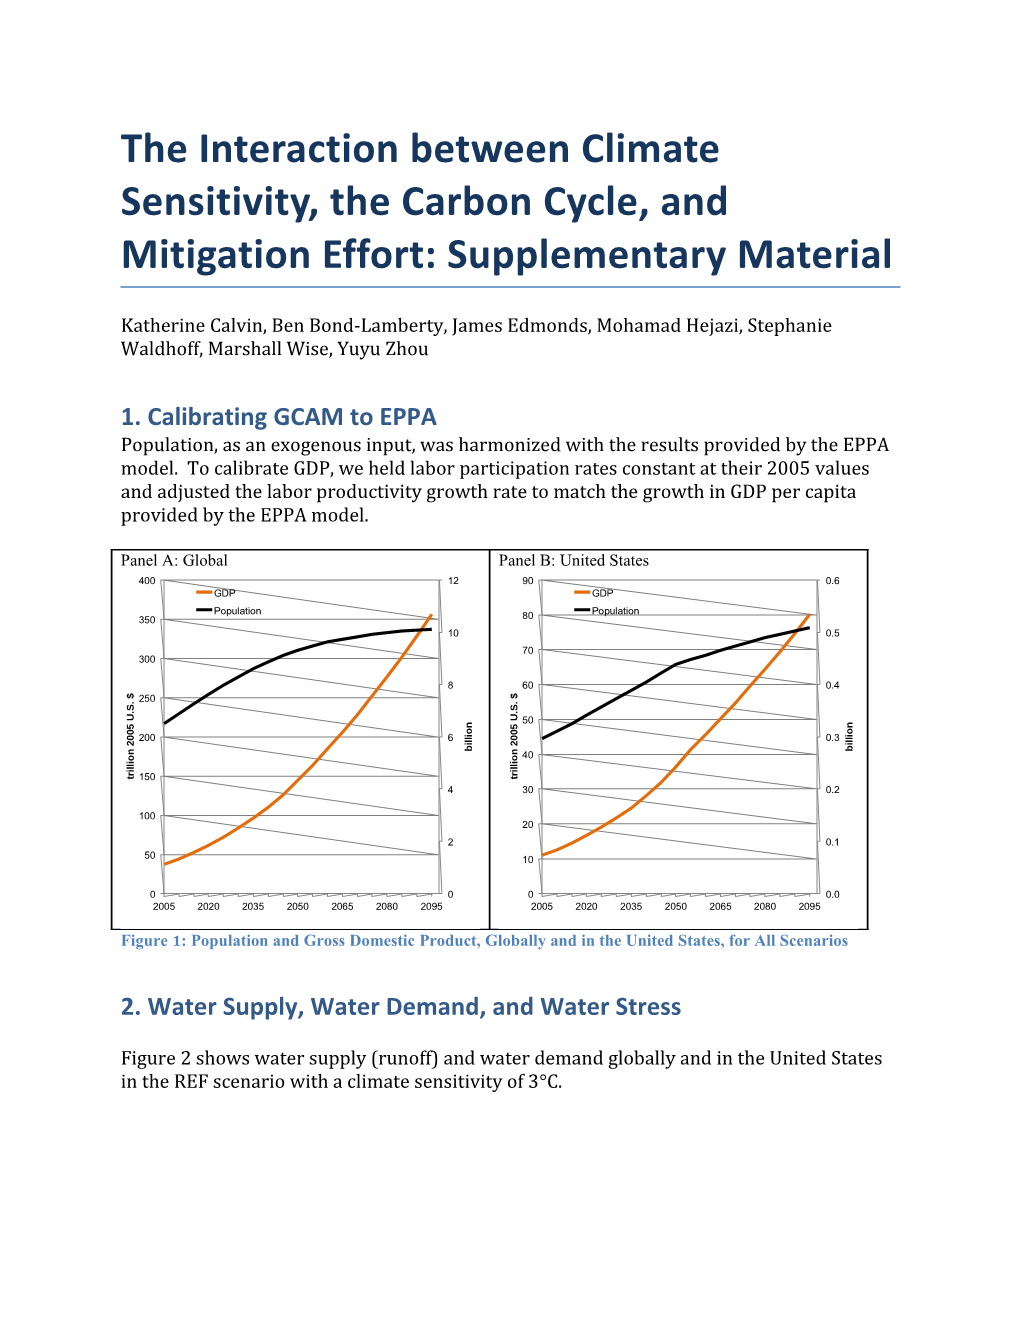 The Interaction Between Climate Sensitivity, the Carbon Cycle, and Mitigation Effort